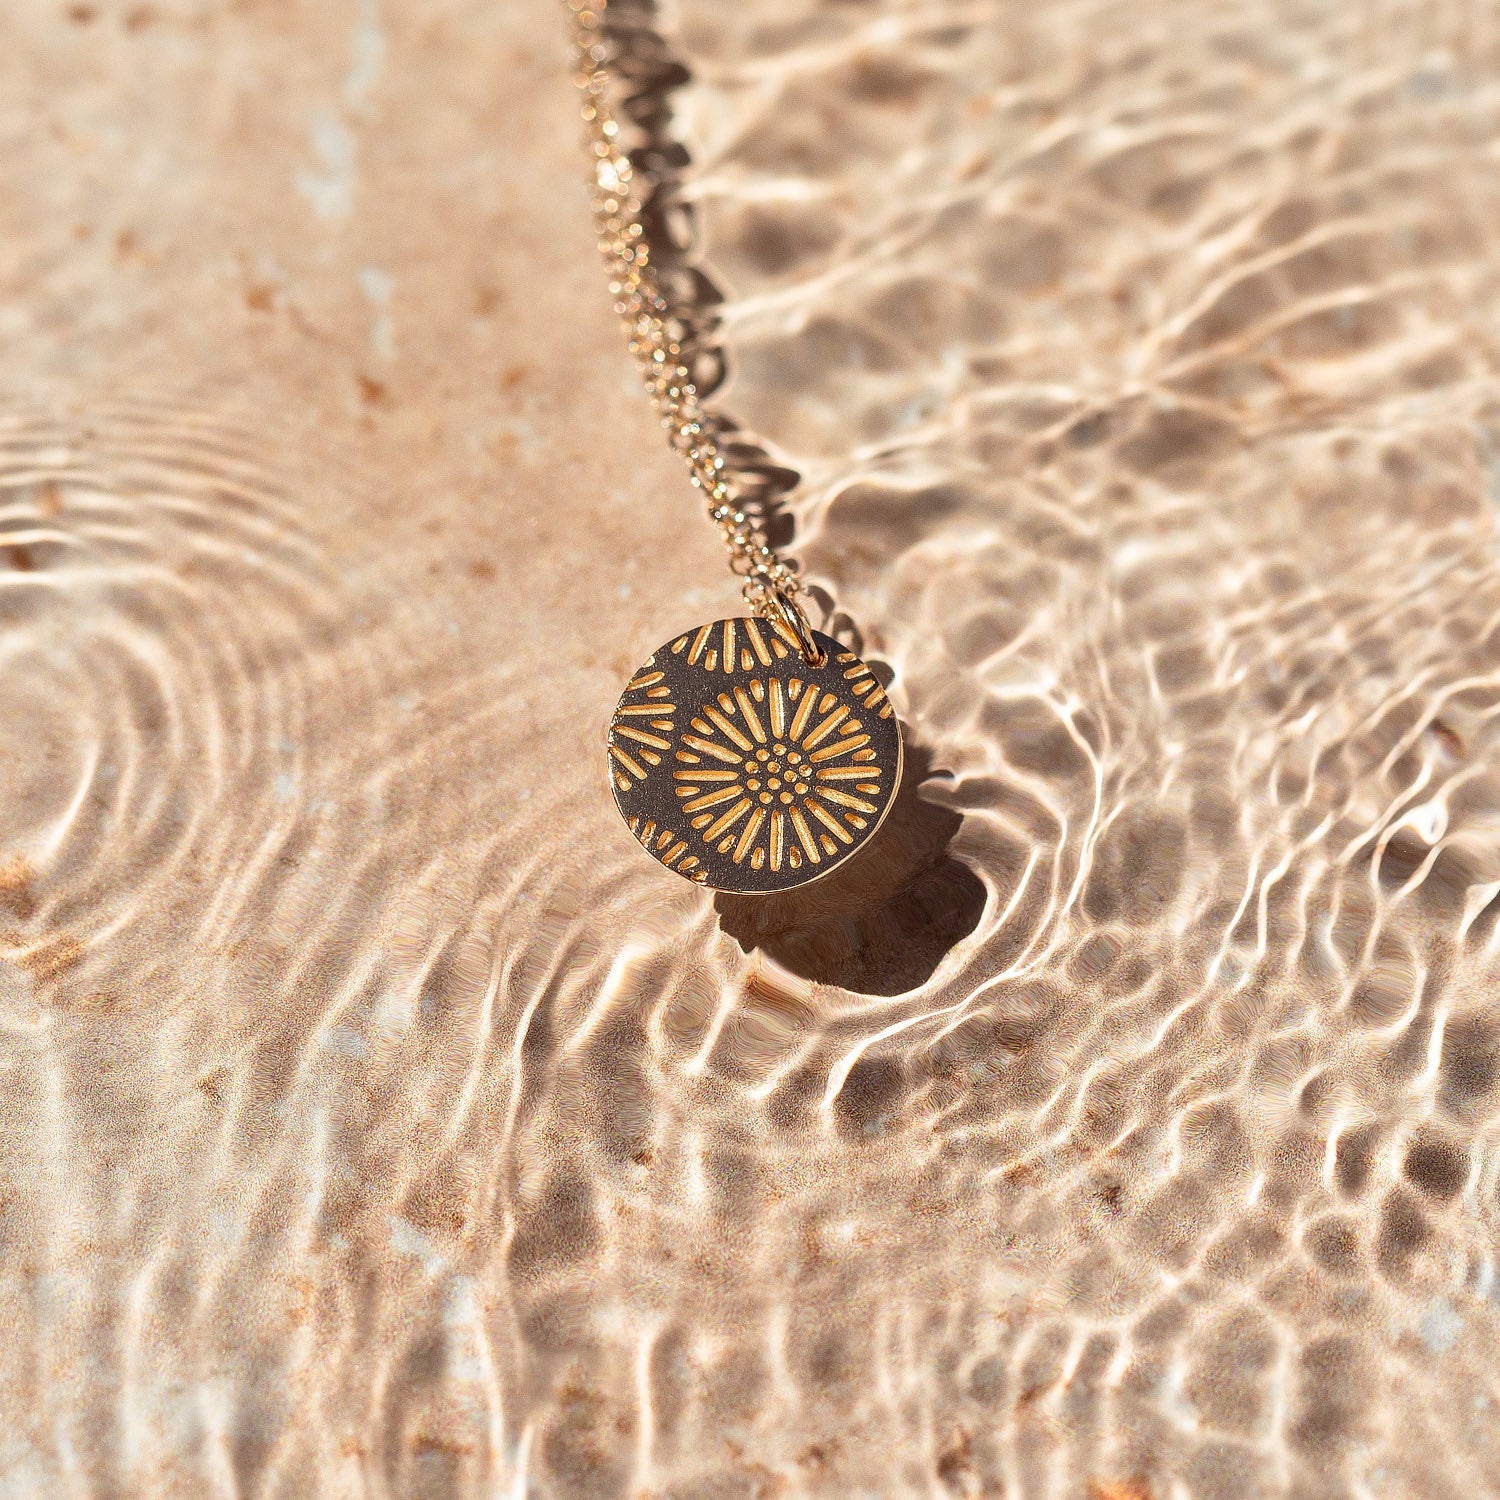 Coral texture solid gold pendant necklace - Simone Walsh Jewellery Australia